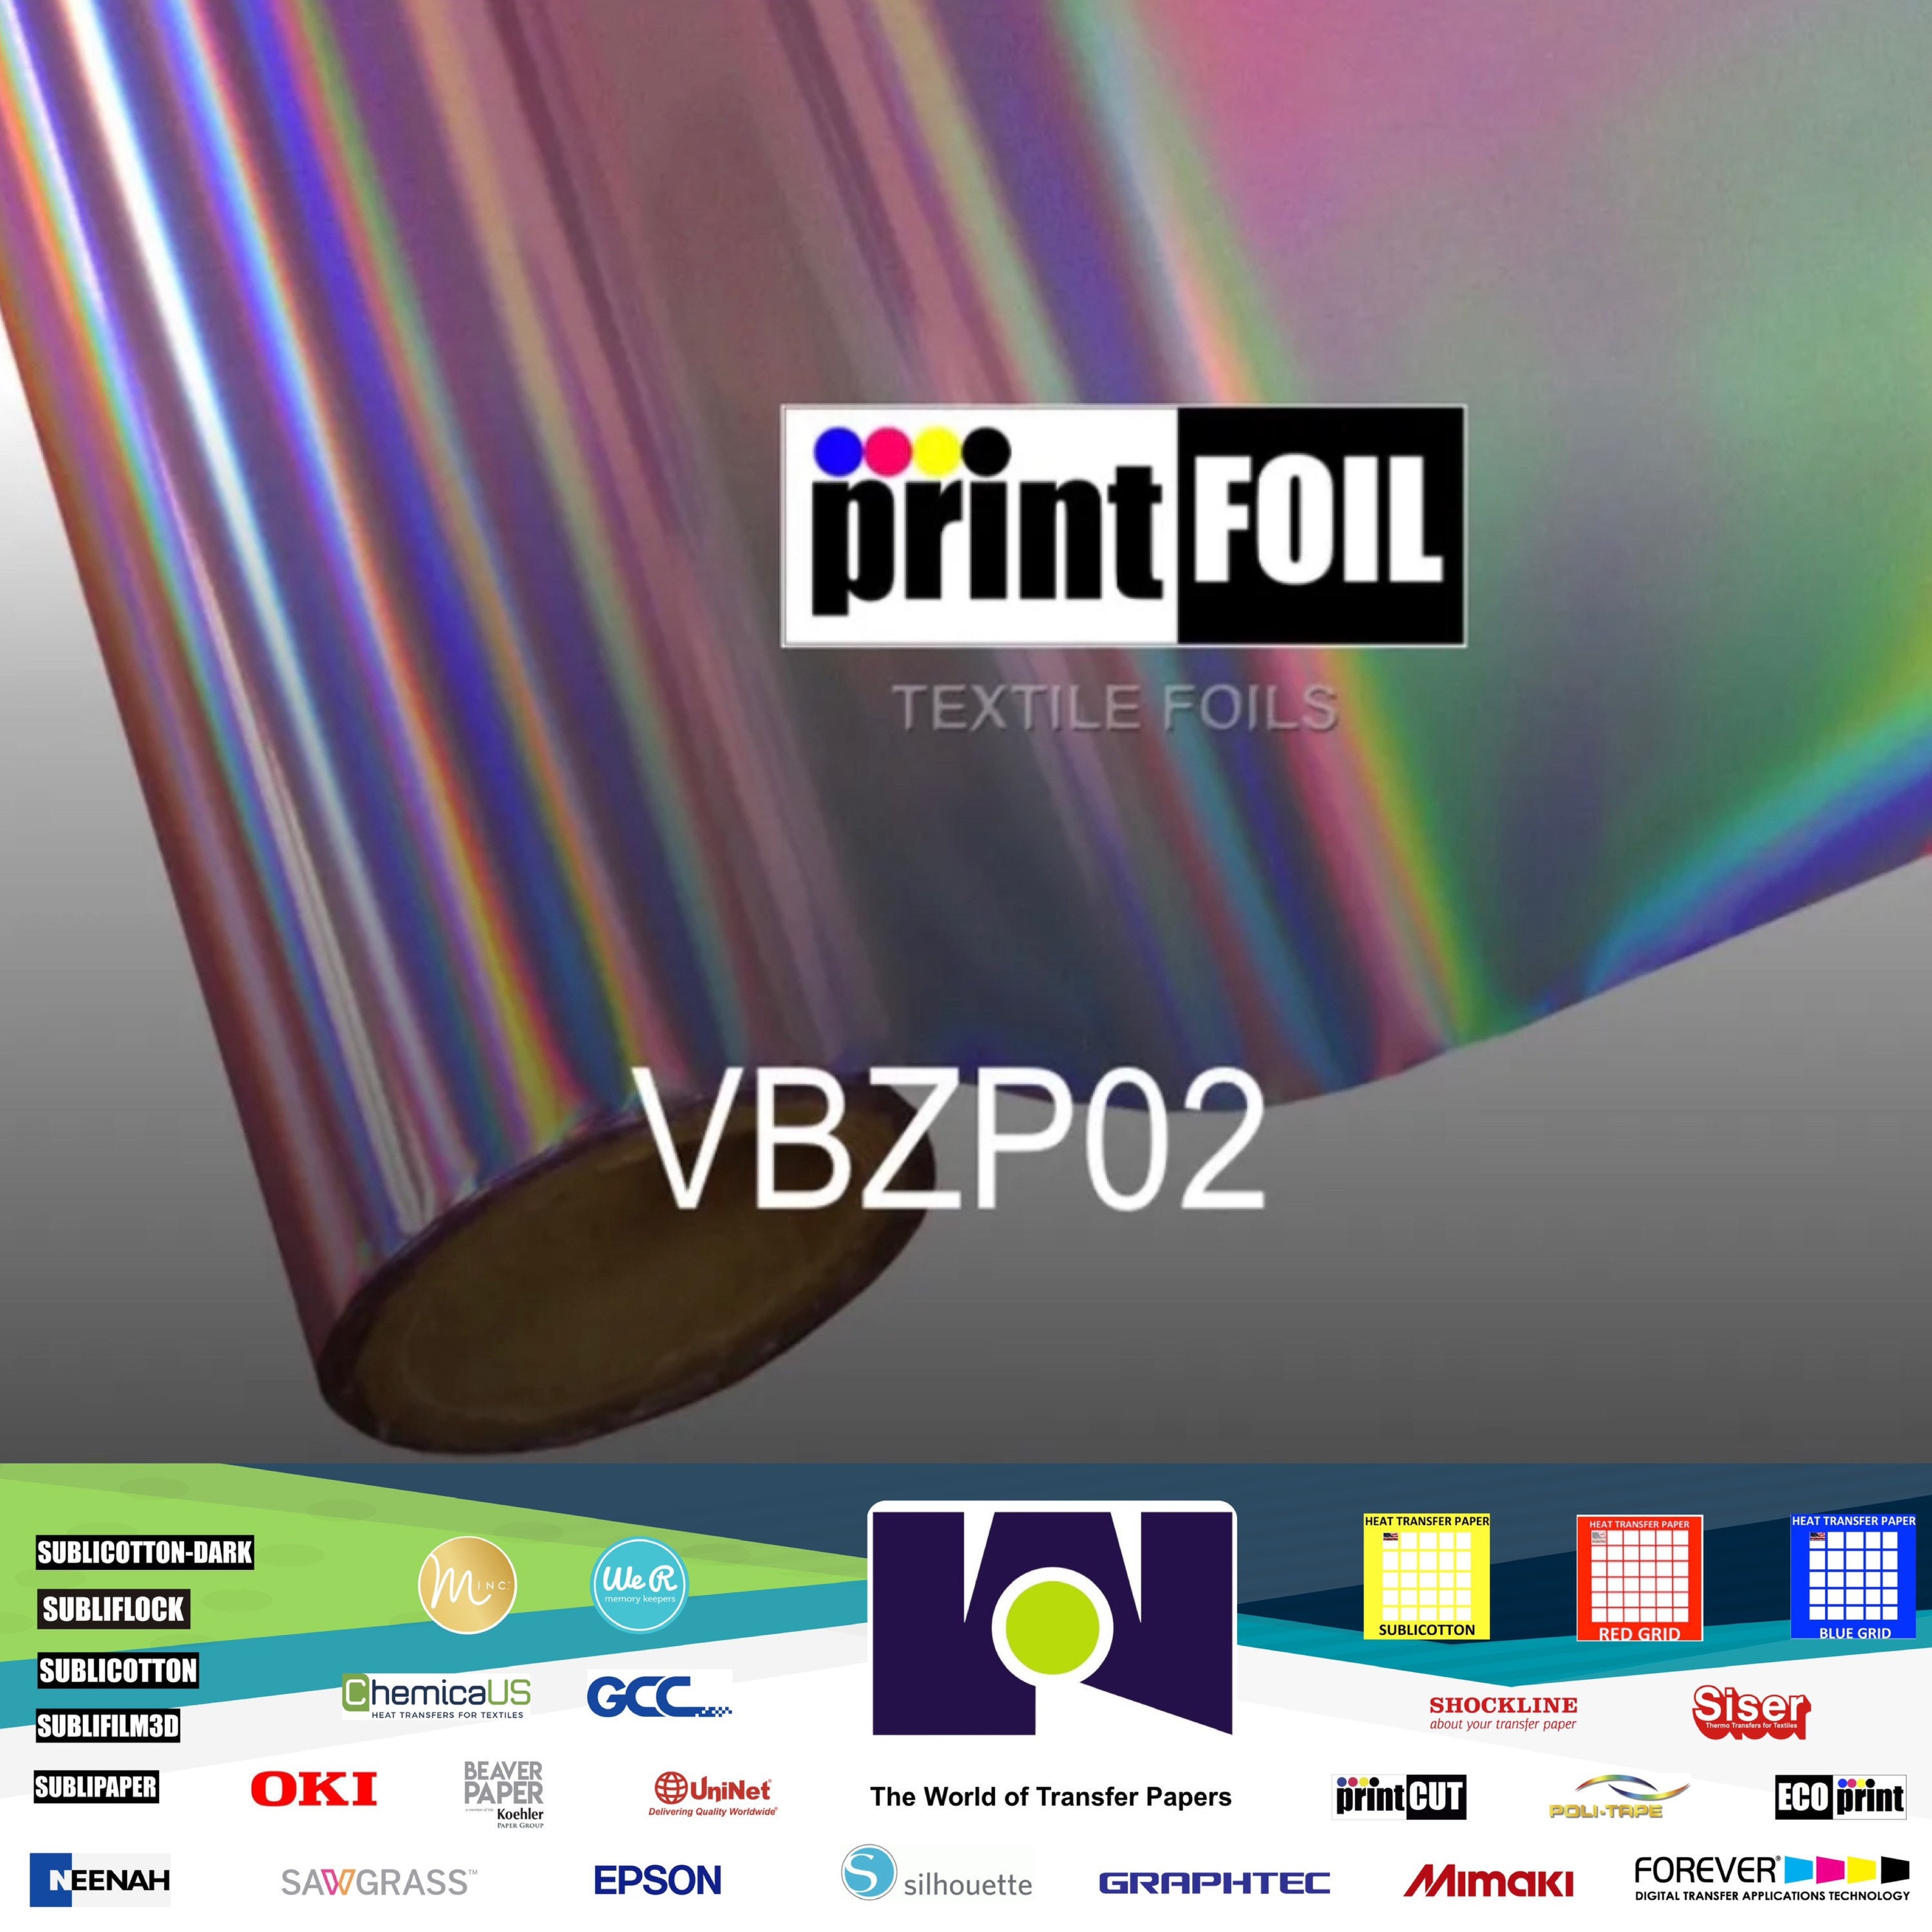 Reliable Toner Reactive Foil Supplier in China - HDFOIL